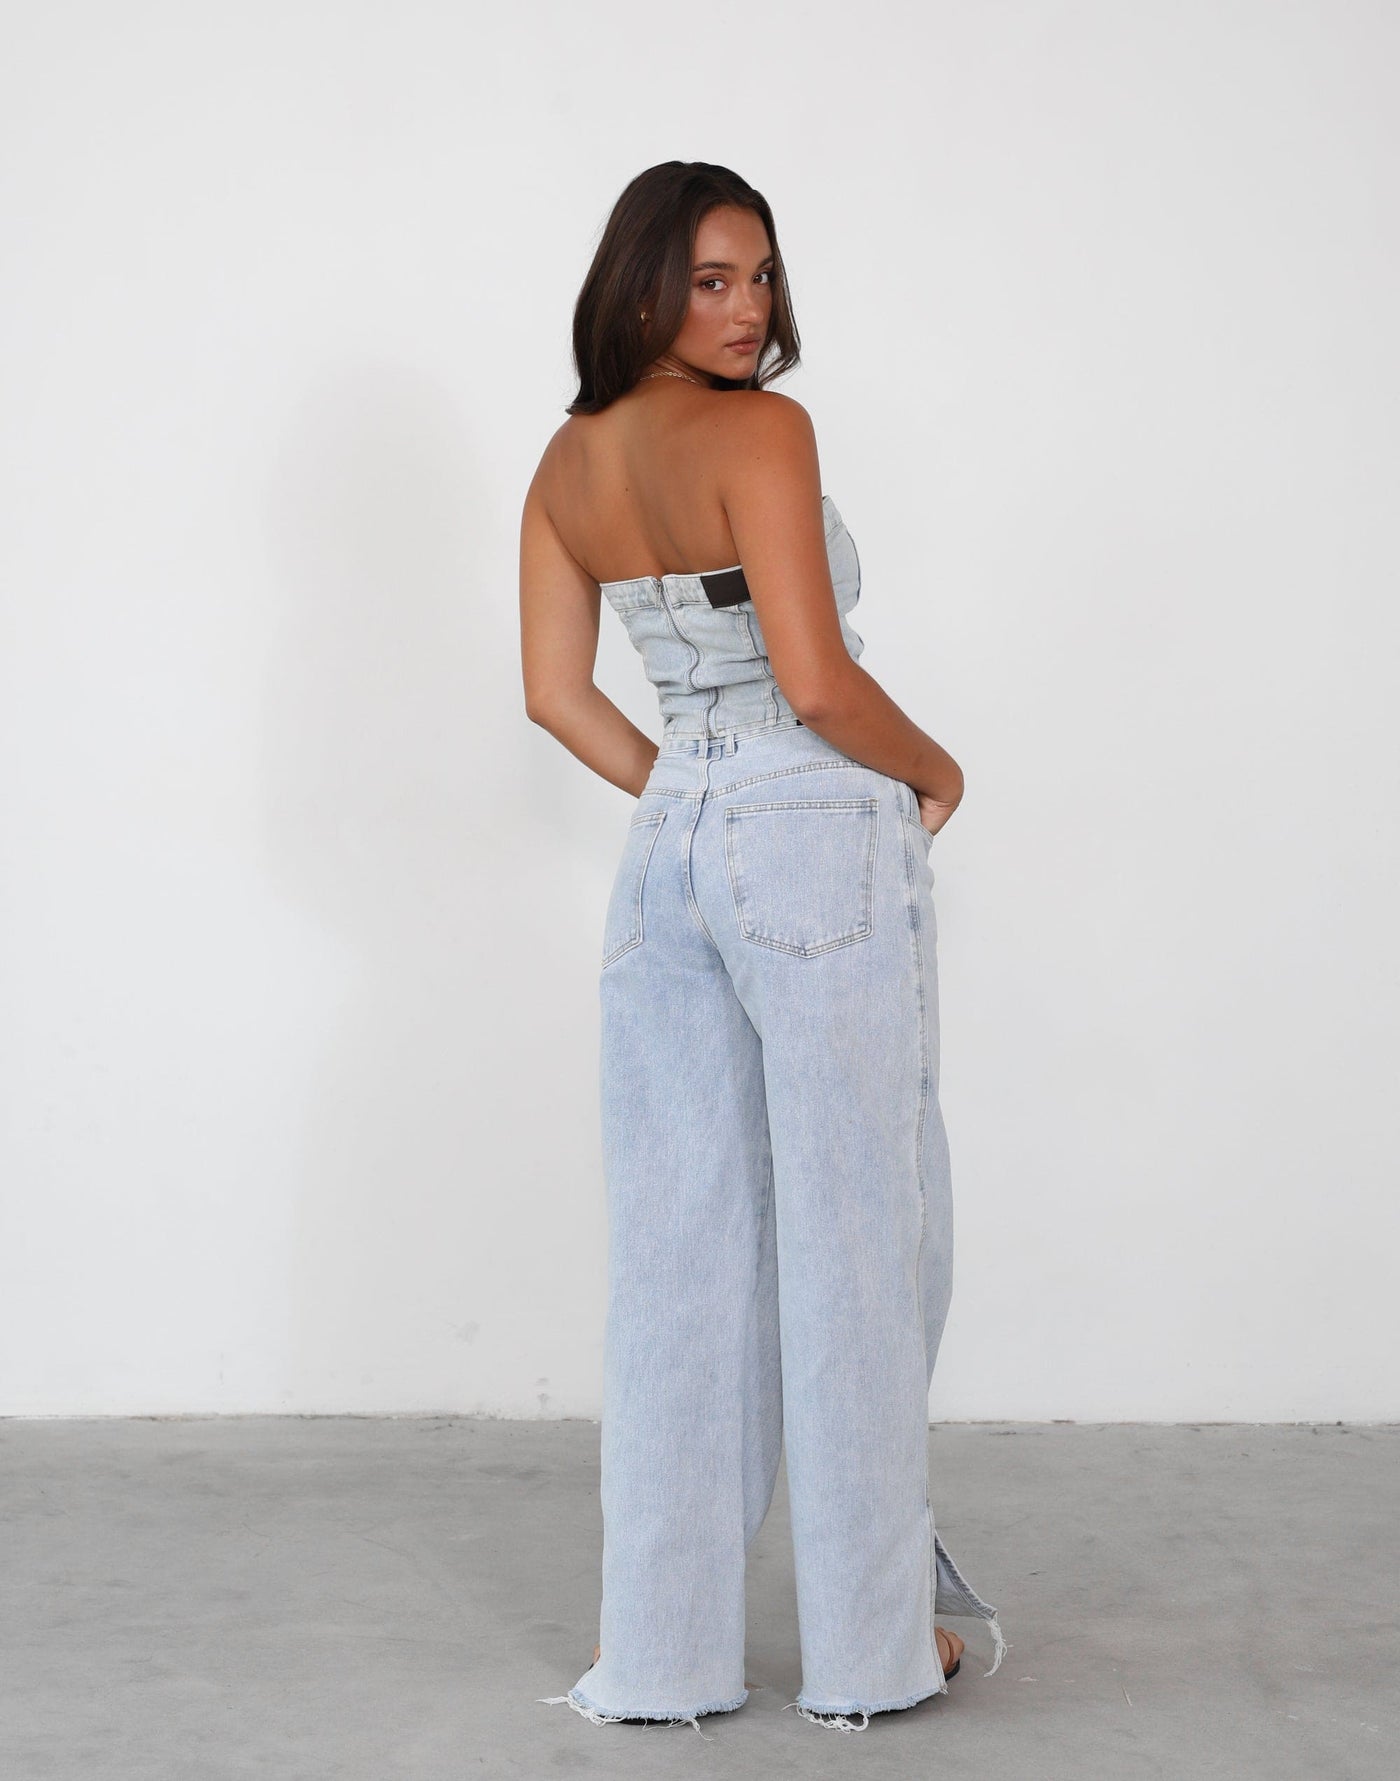 Tommy Jeans (Light Vintage) | Charcoal Exclusive - High Waisted Jeans With Slits - Women's Pants - Charcoal Clothing